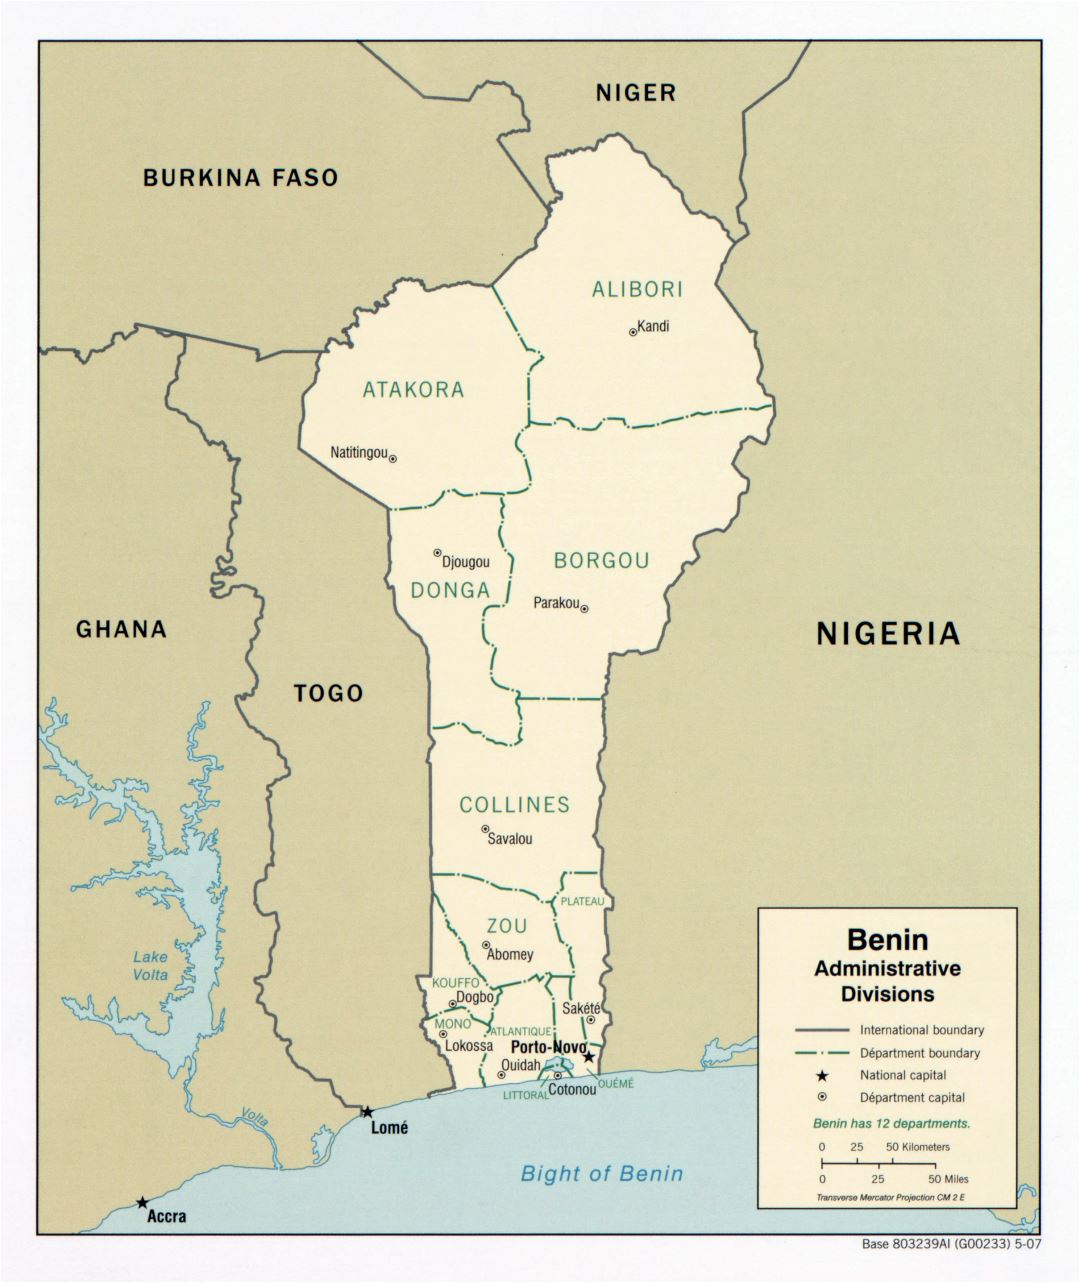 Large scale administrative divisions map of Benin - 2007